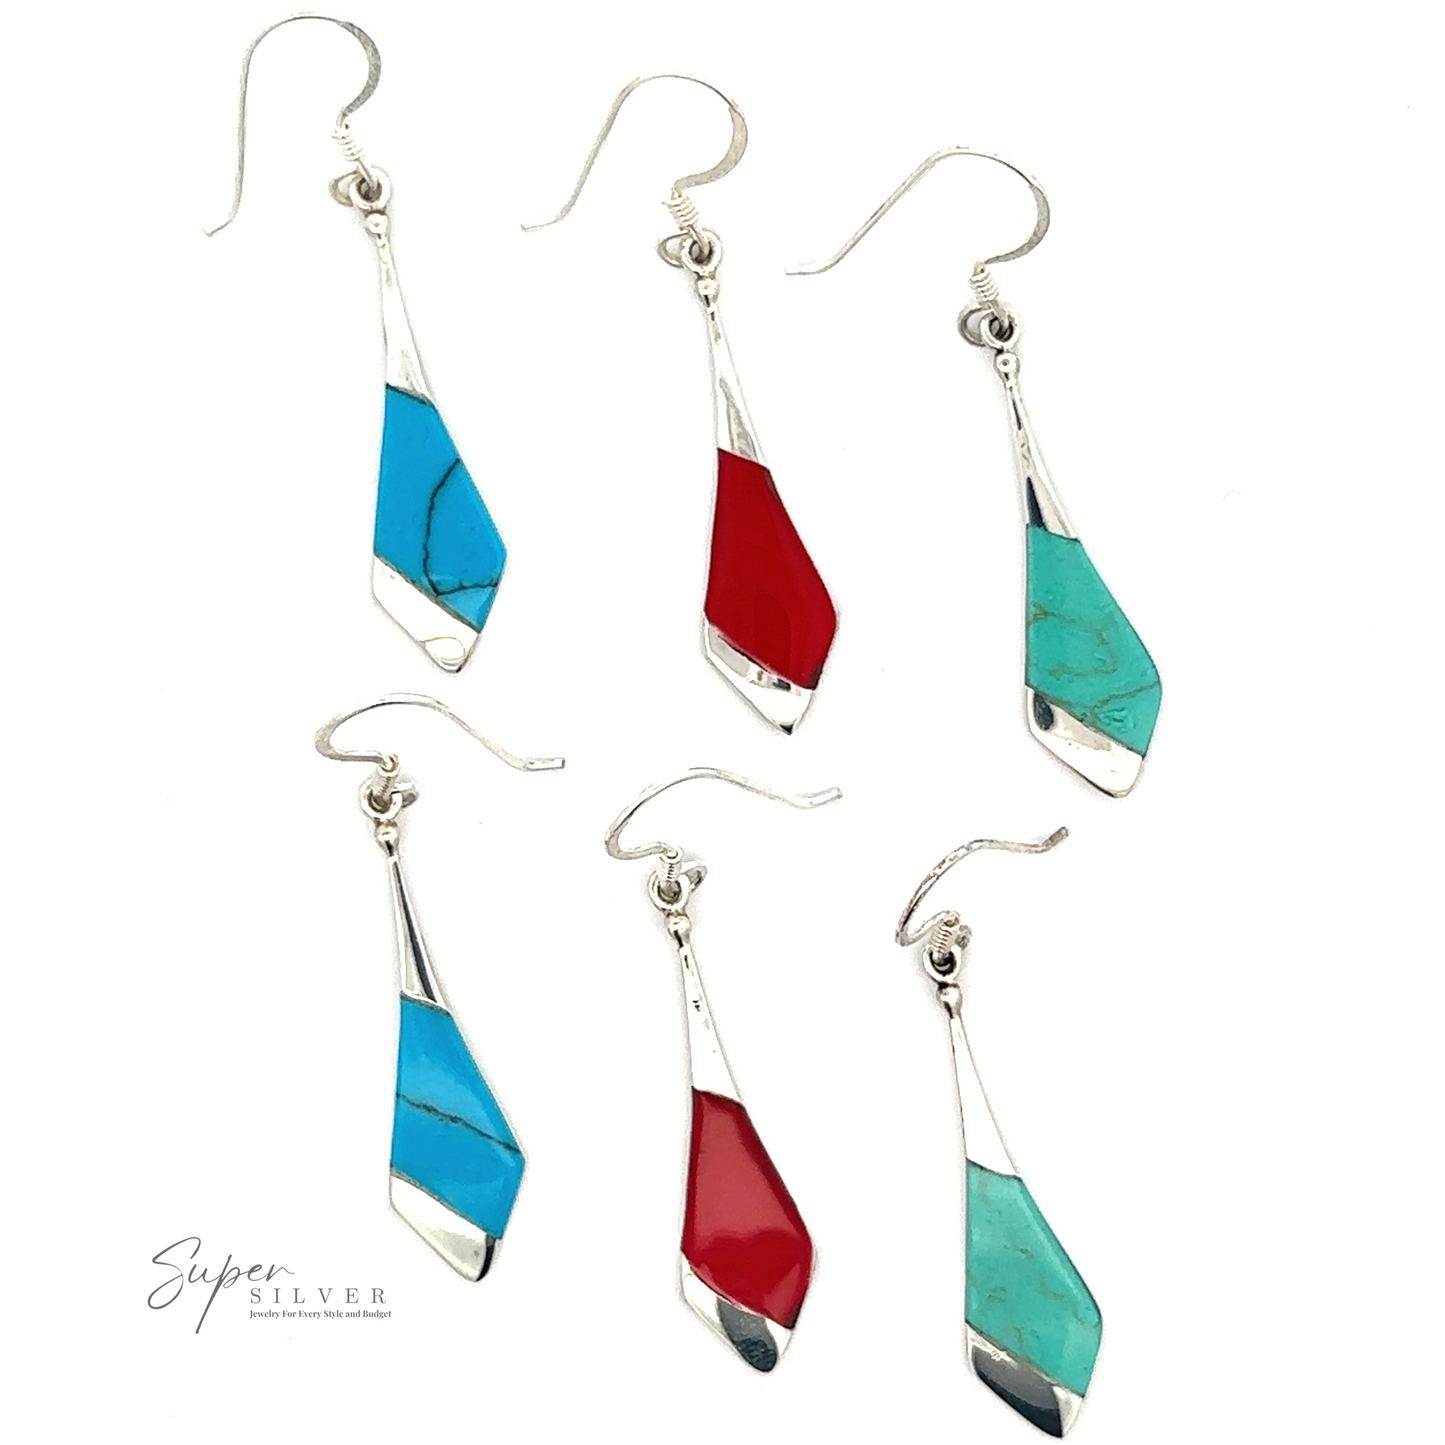 
                  
                    Six pairs of Inlaid Tie-Shaped Earrings are neatly arranged in two columns. Crafted with sterling silver, these earrings feature geometric inlays of reconstituted coral, turquoise, blue, red, and green stones. The Super Silver logo is visible in the corner.
                  
                